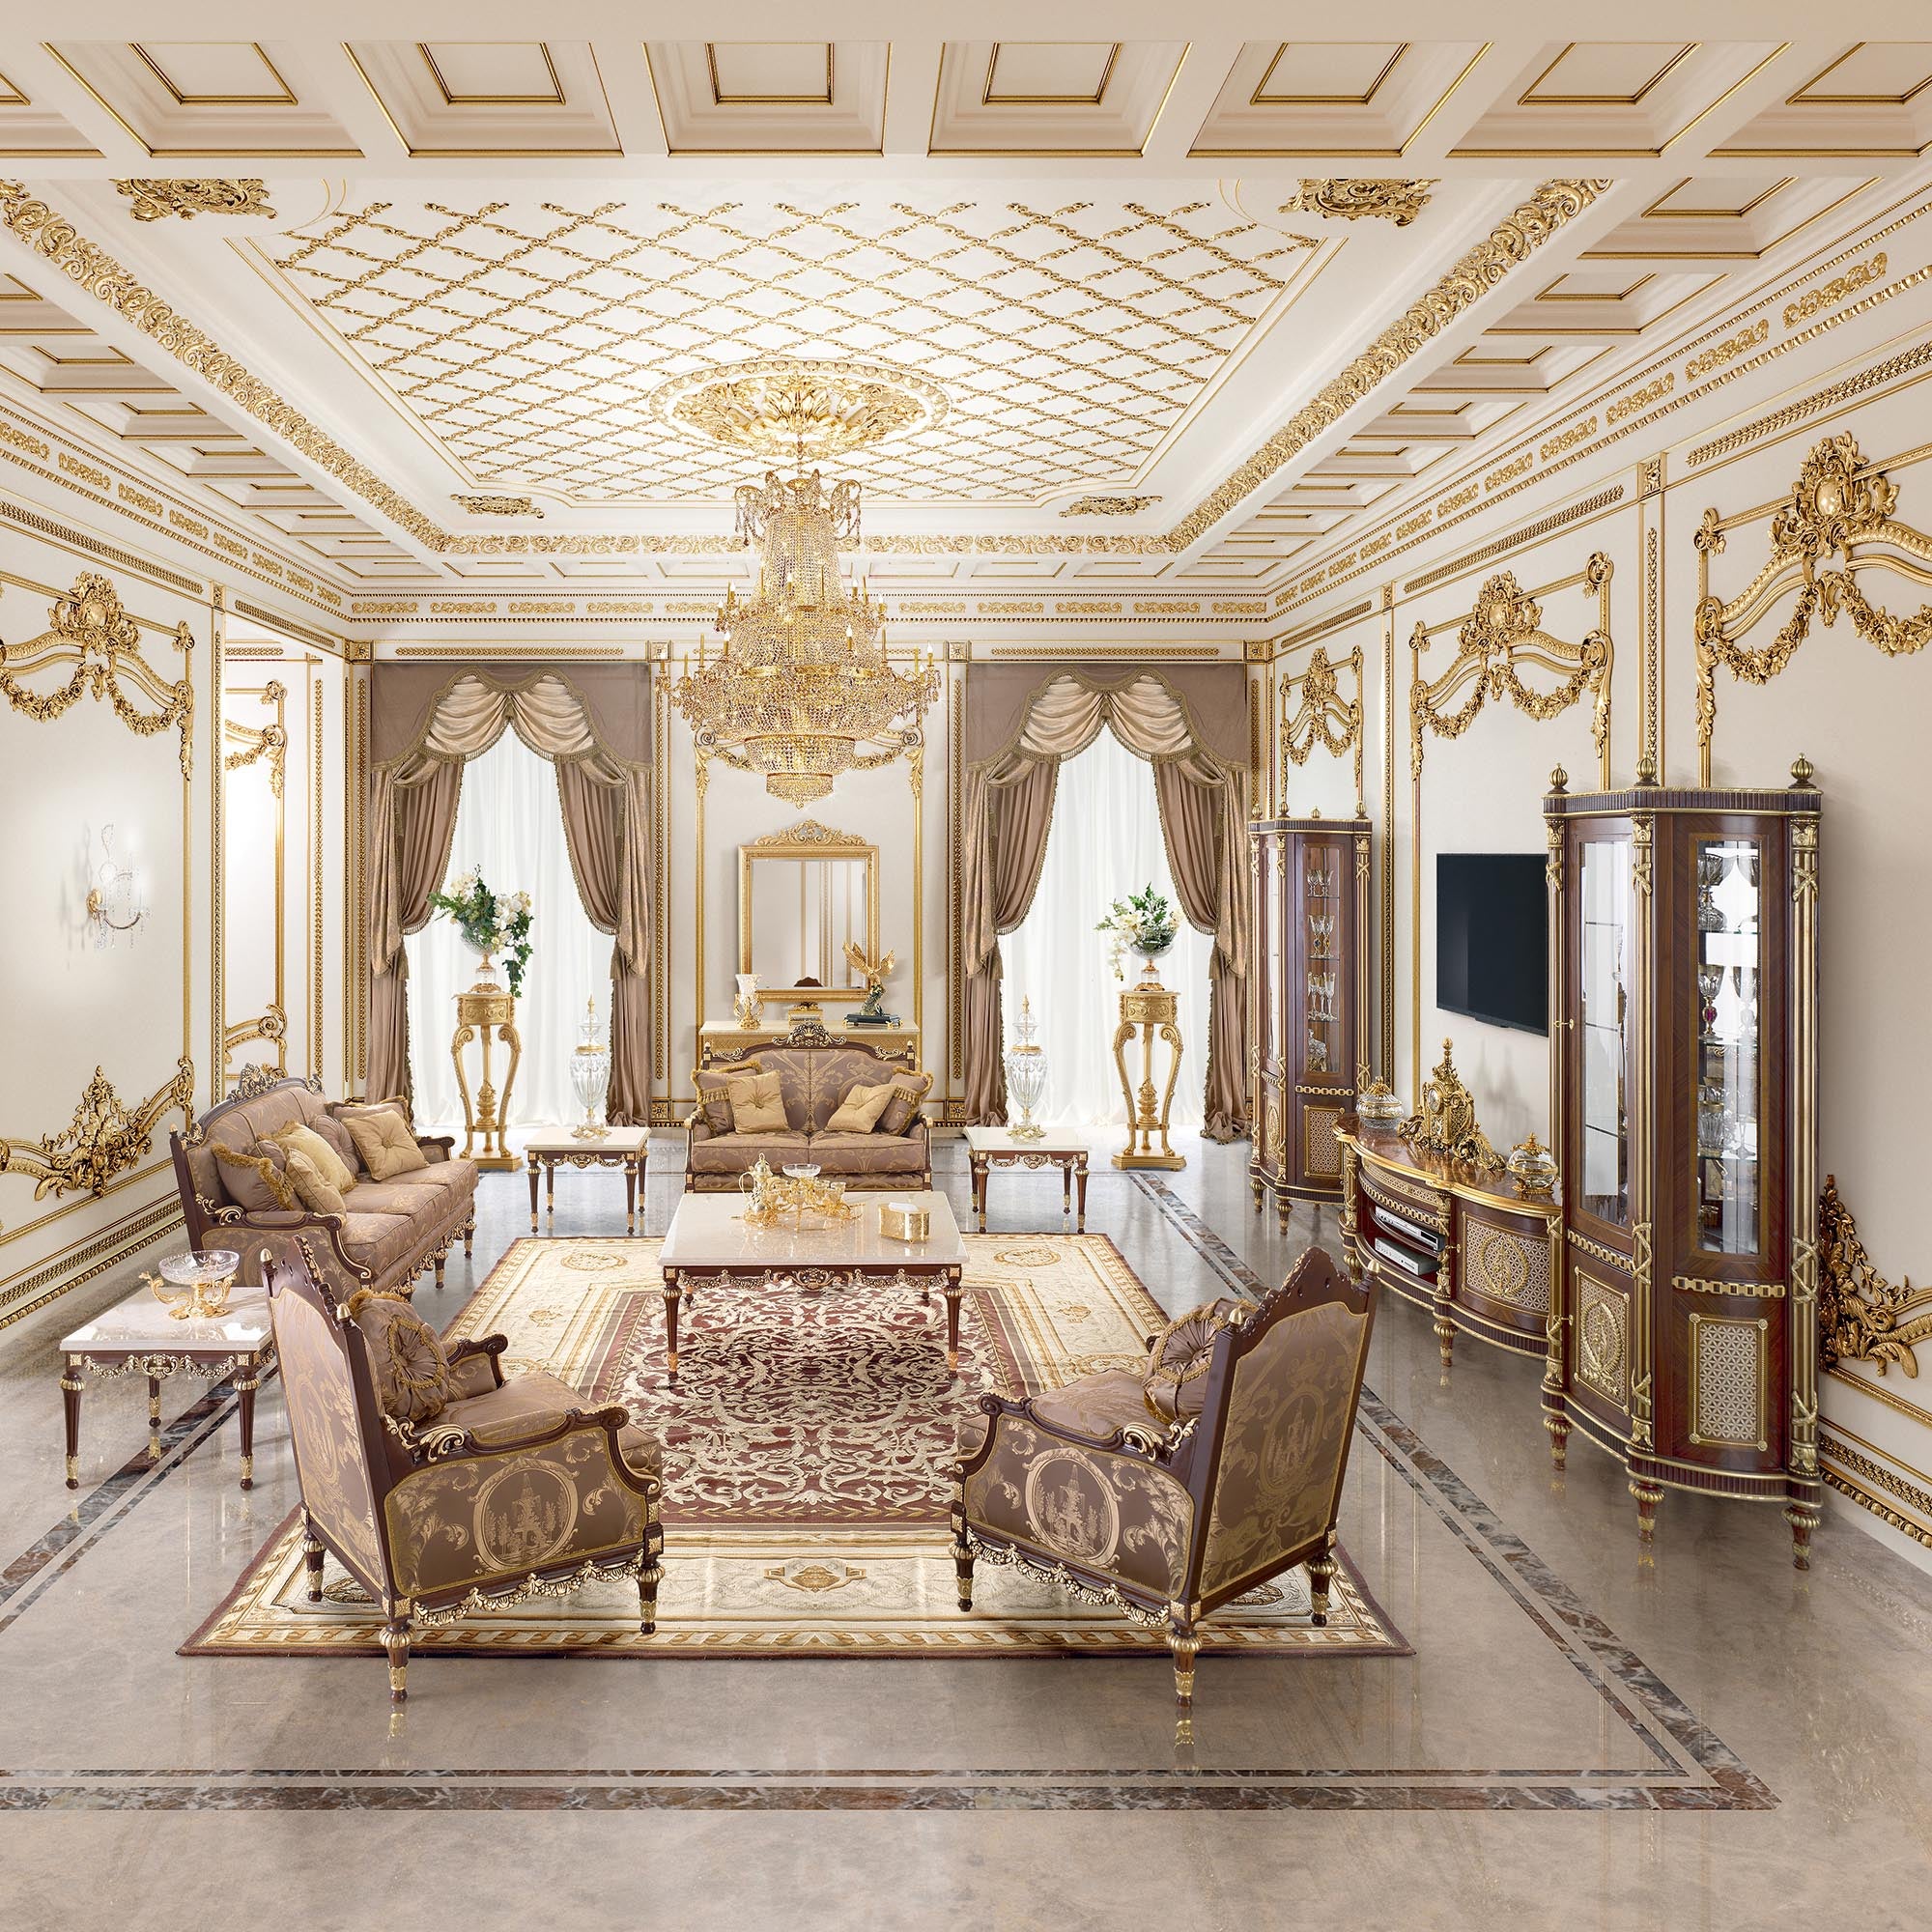 Imperial Homes: Living Like Royalty with Opulent Design